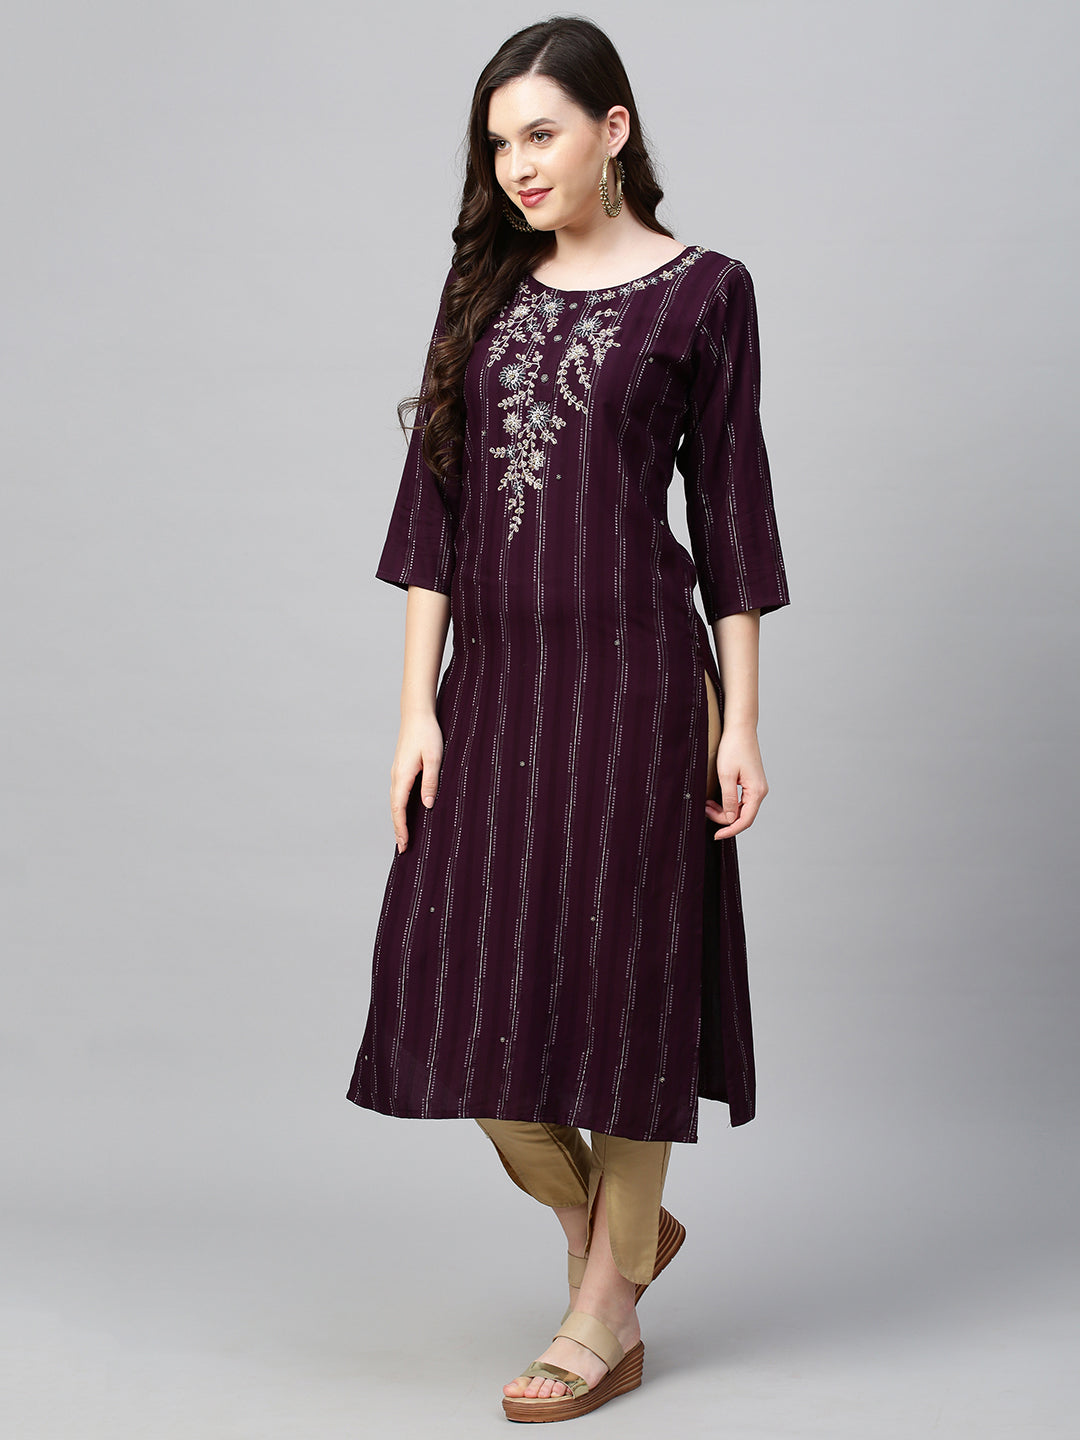 Fit & Flare Wine Embroidered Rayon Top